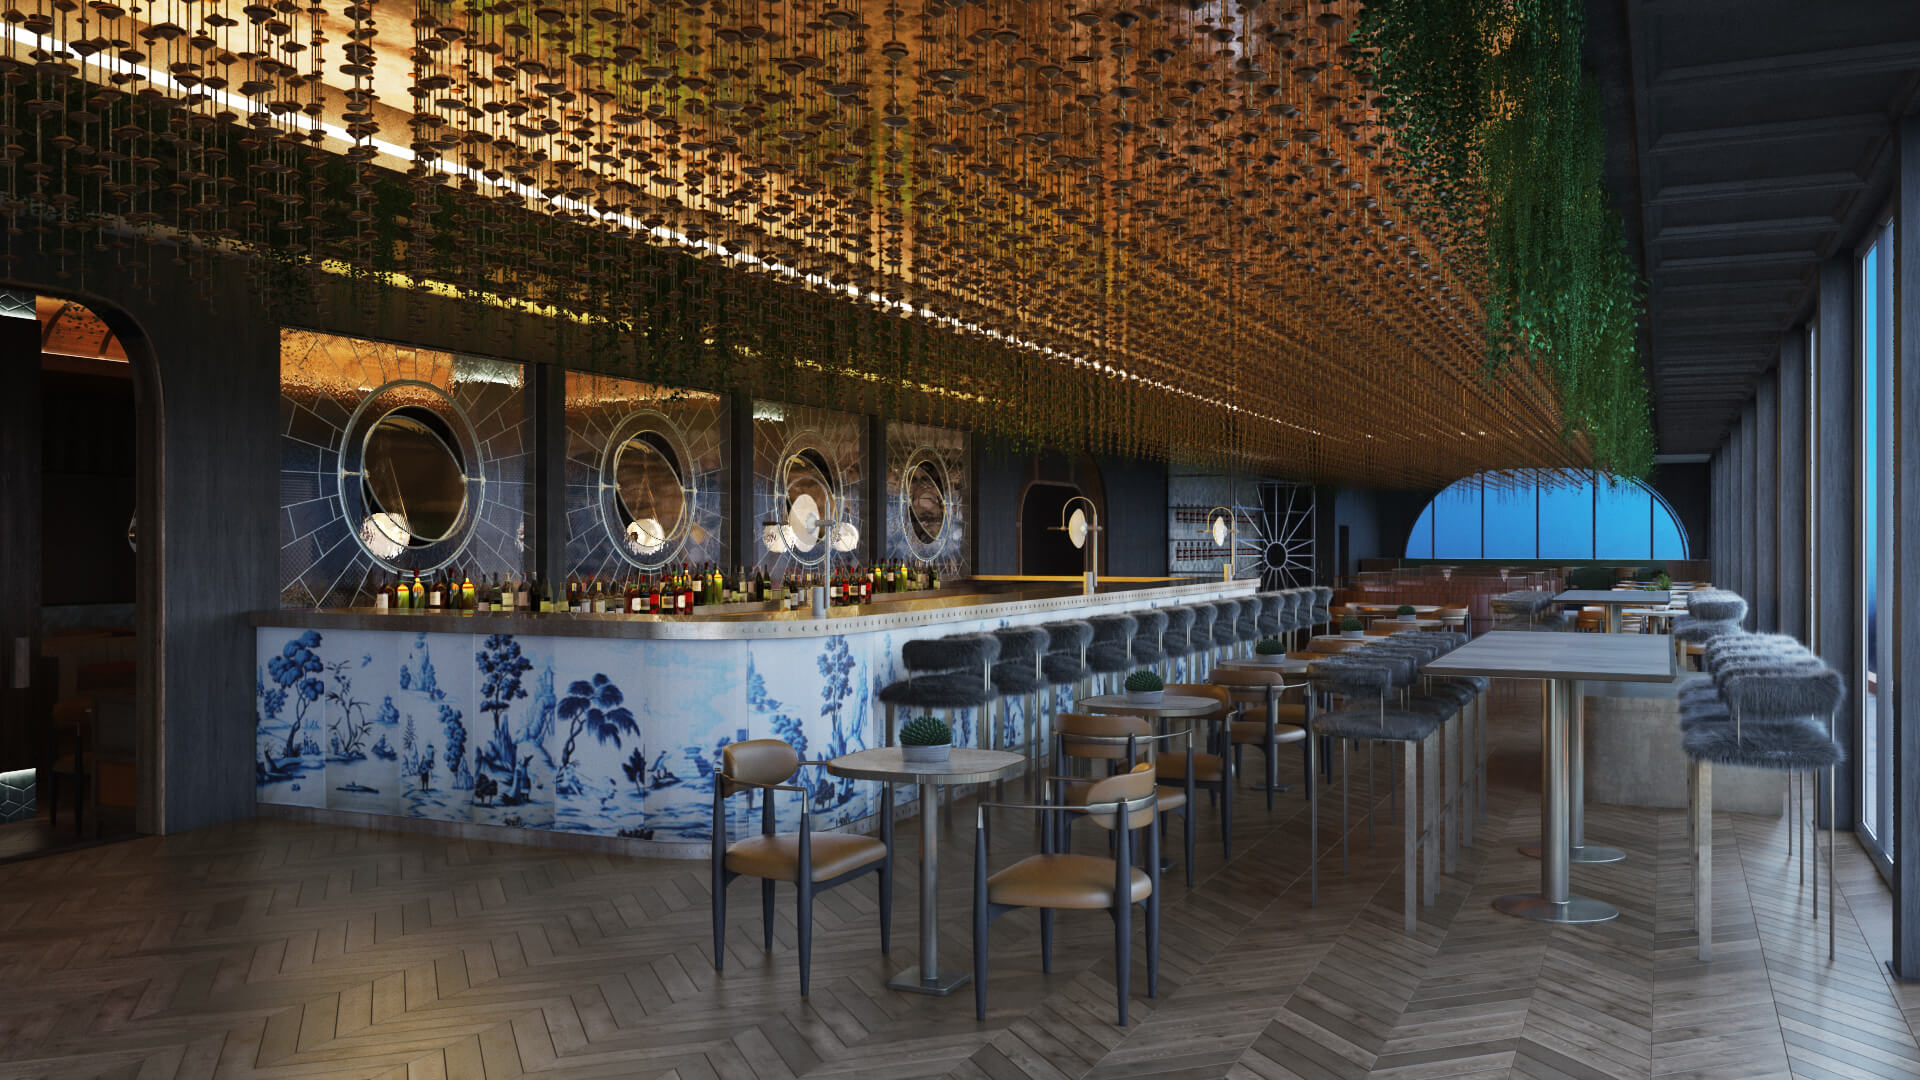 Preliminary Results of a Restaurant CGI Project